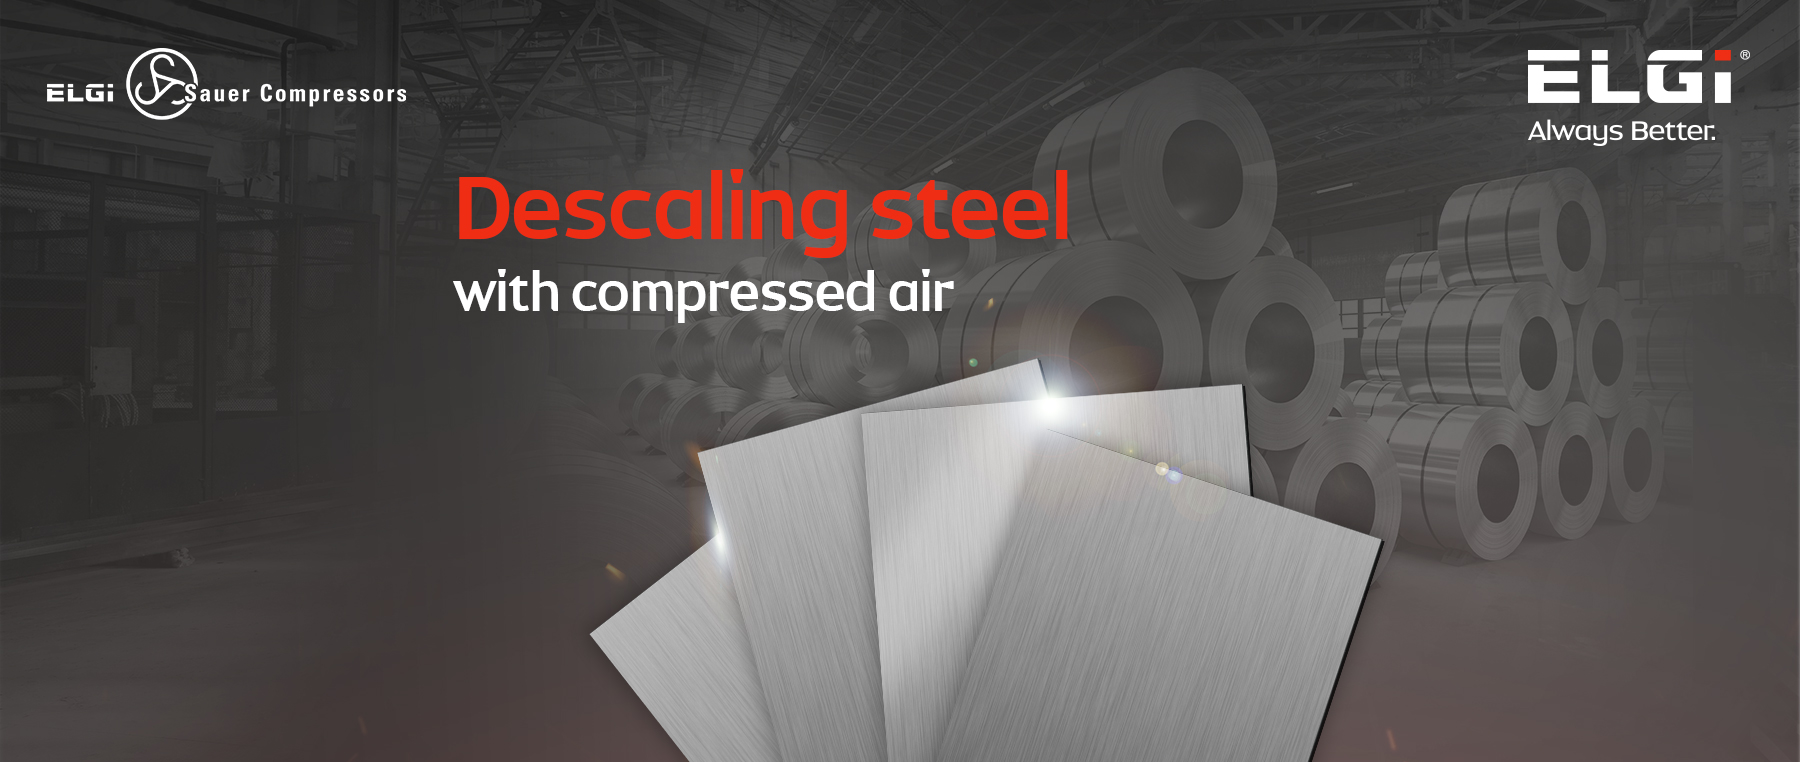 Descaling Steel with Compressed Air